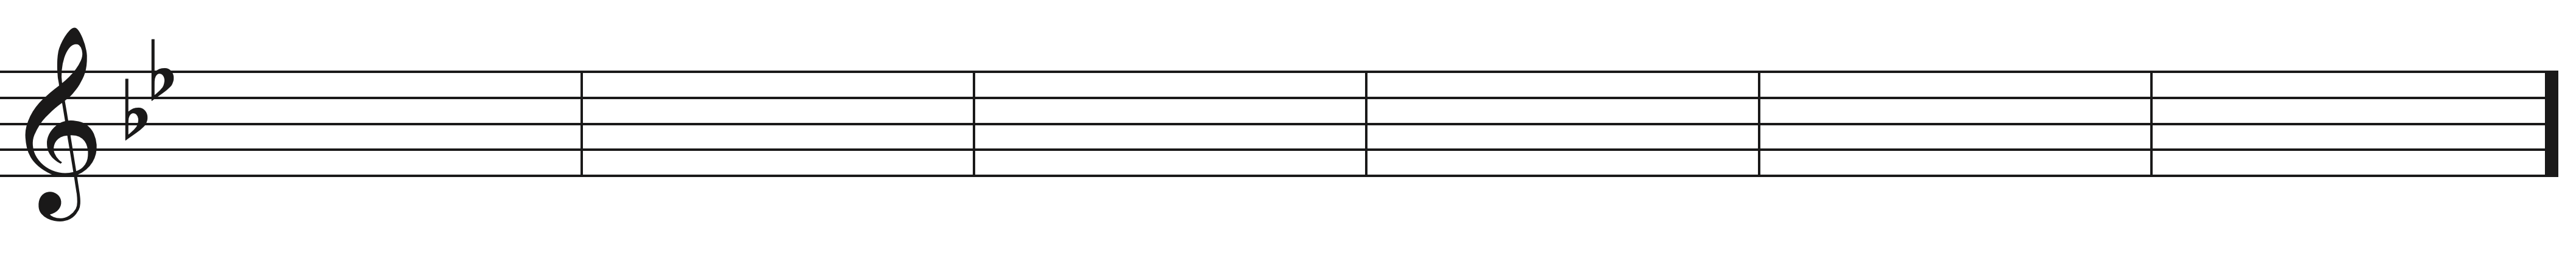 Roman Numeral Aural Training exercise example1